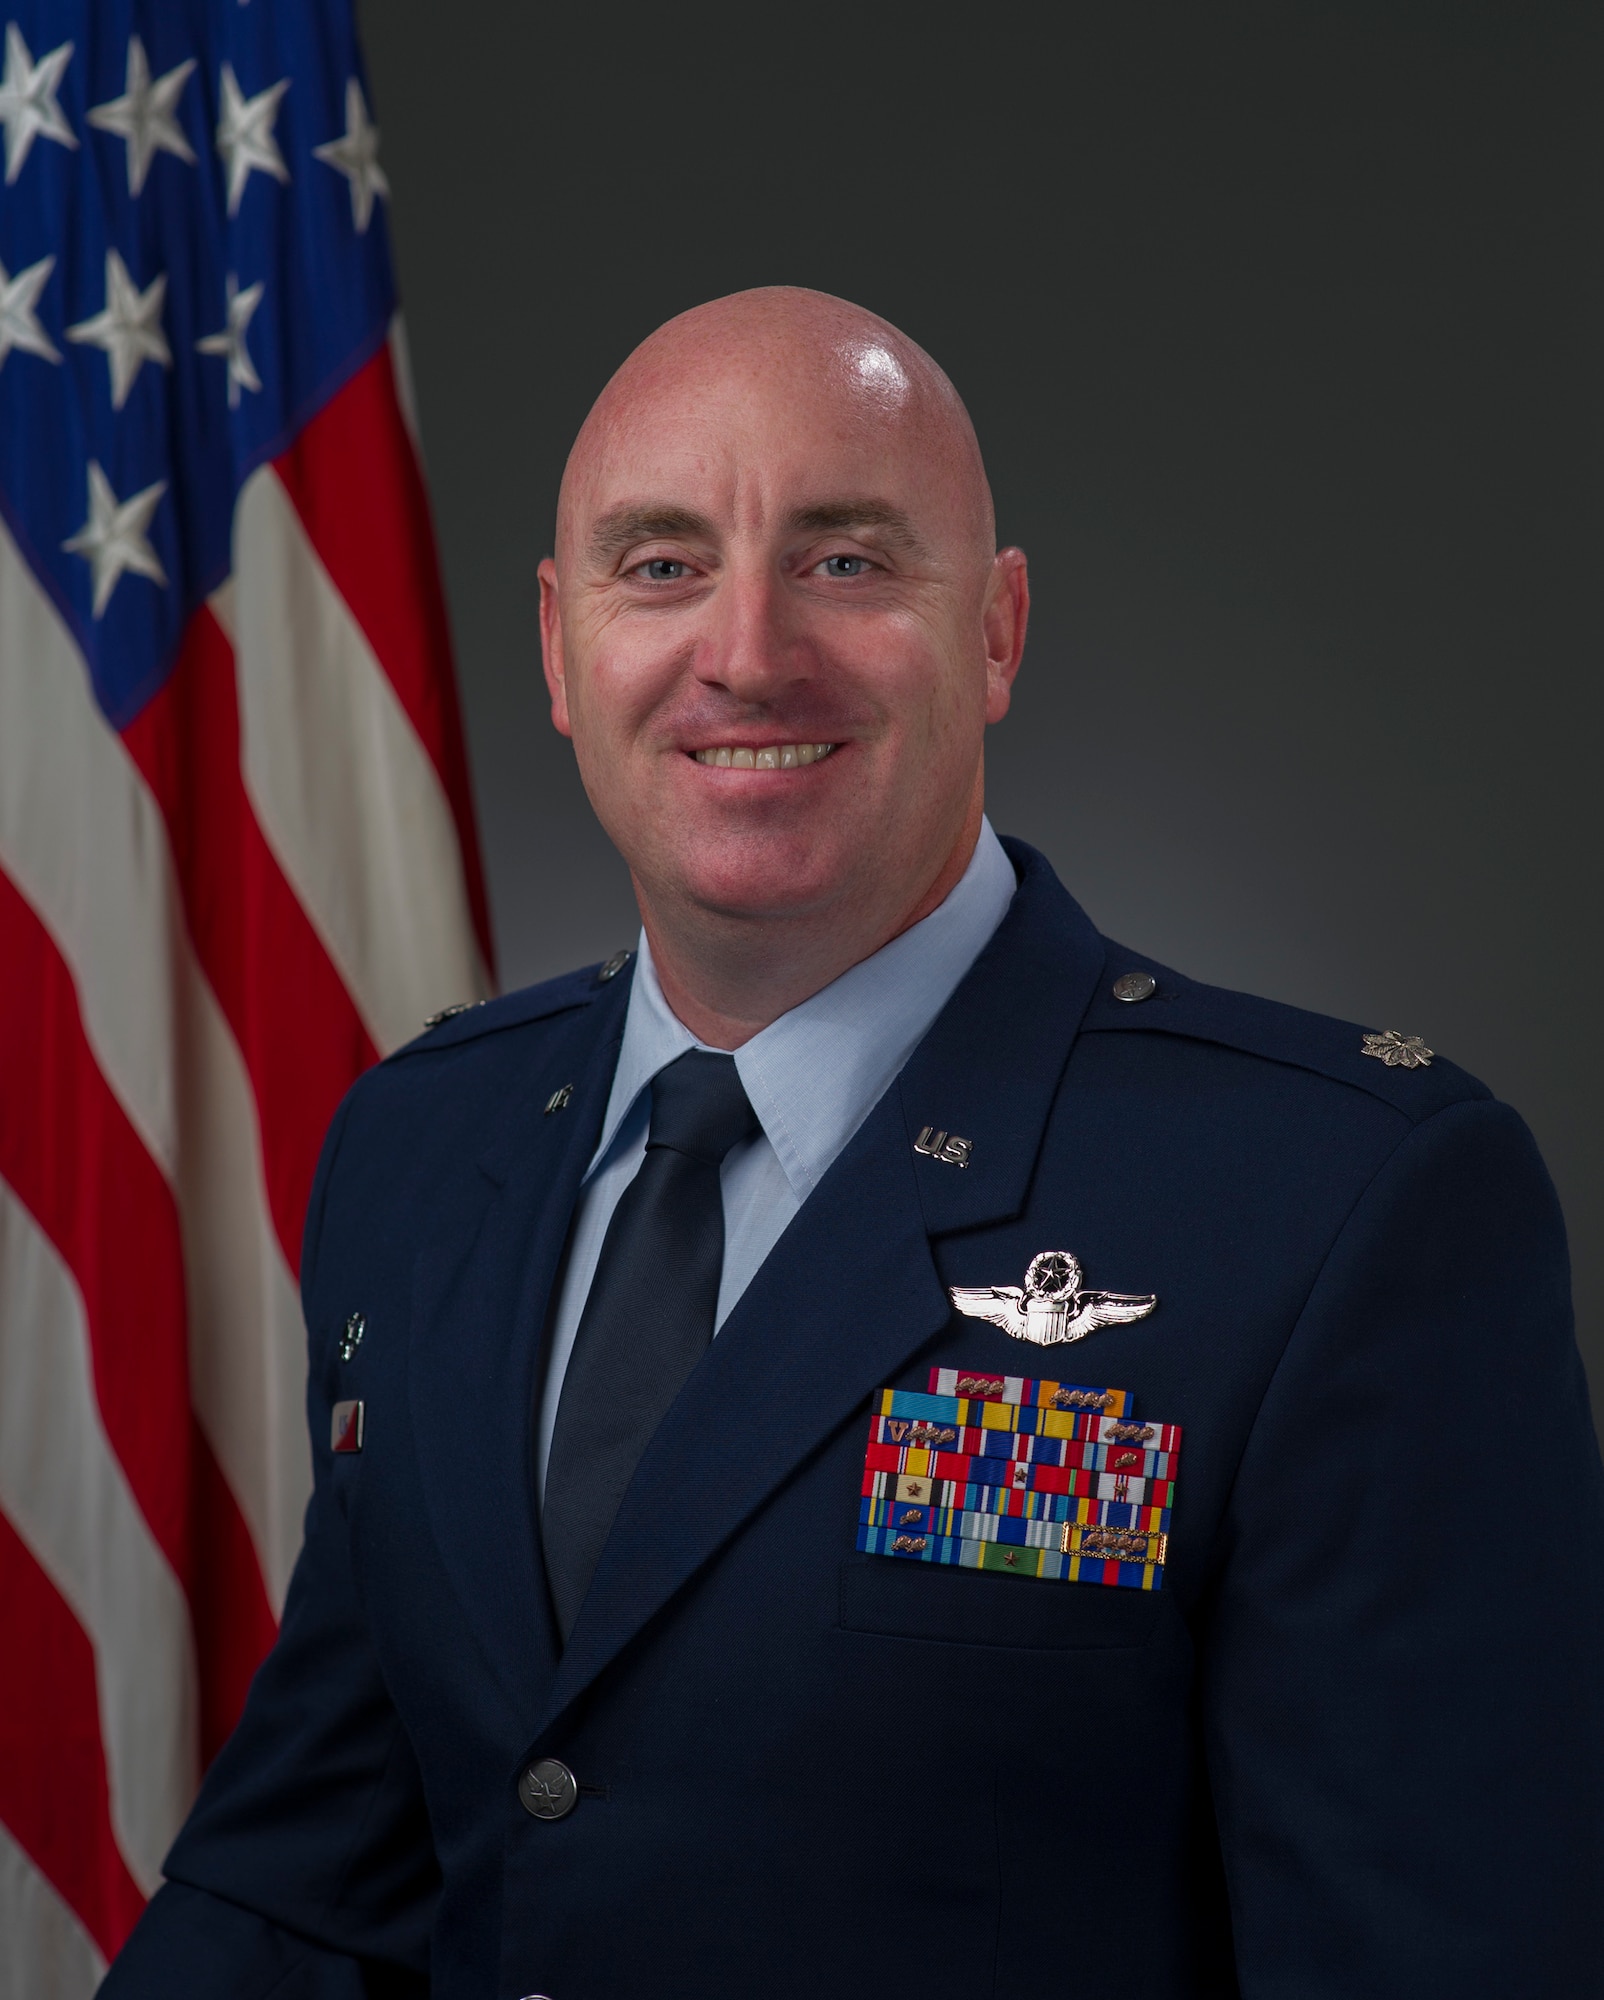 Lt. Col. Robert Kline, 921st Contingency Response Squadron commander, encourages all Airmen to serve as 'one team' to ensure mission success. (Courtesy Photo)